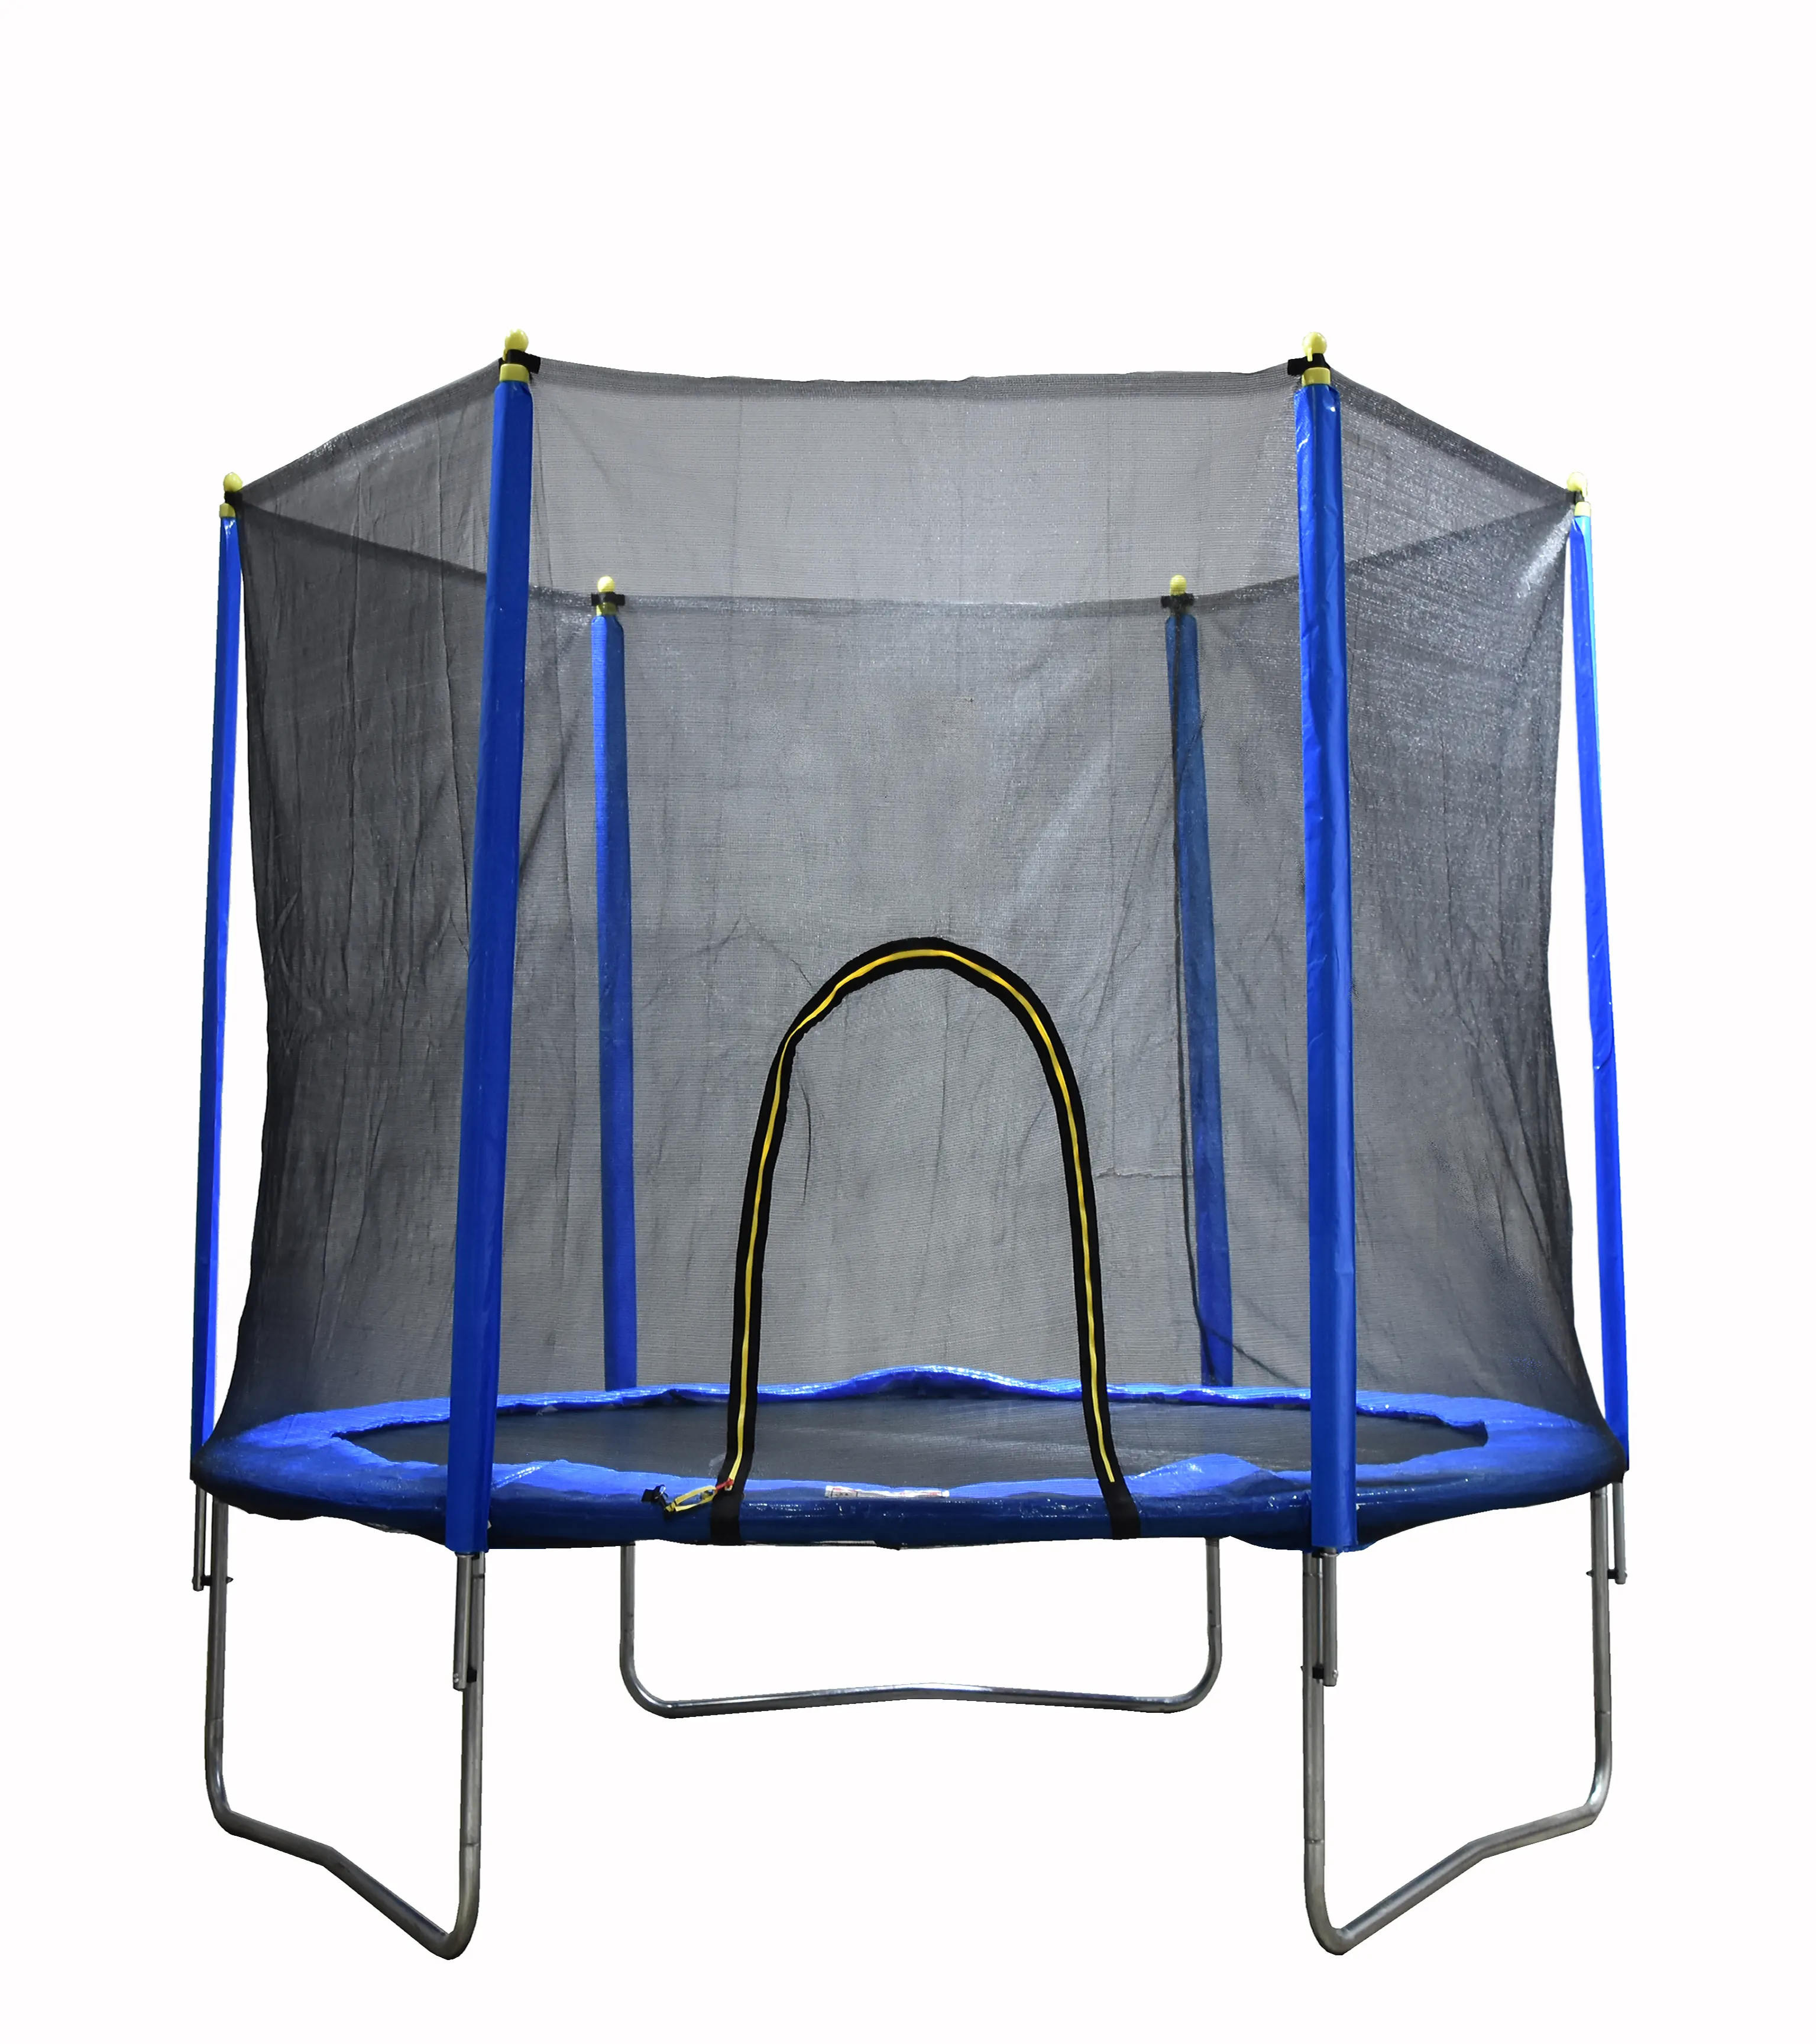 China 10FT 3 Legs Children Trampoline Bungee Jumping Kids Outdoor Trampoline for Sale